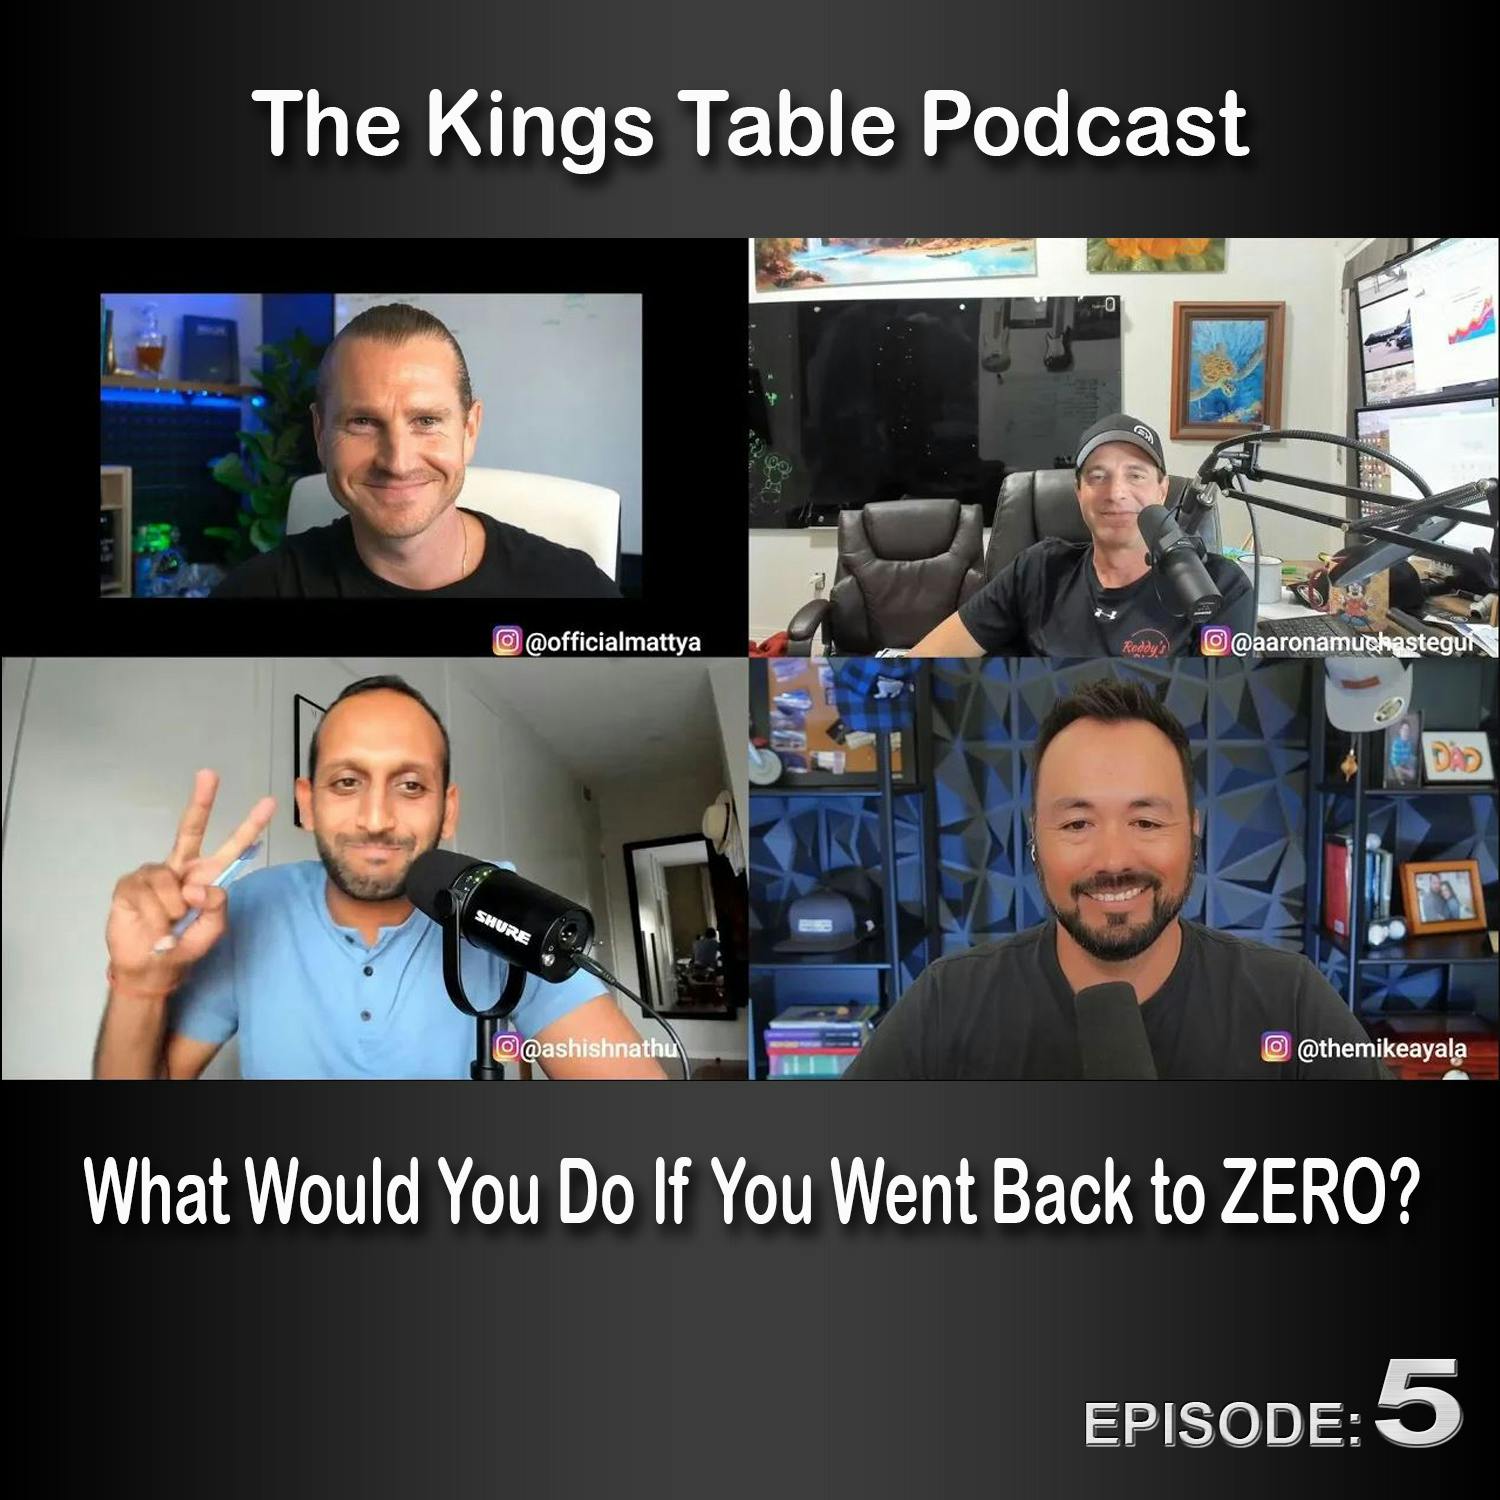 The Kings Table Episode 5 - What Would You Do If You Went Back to ZERO?